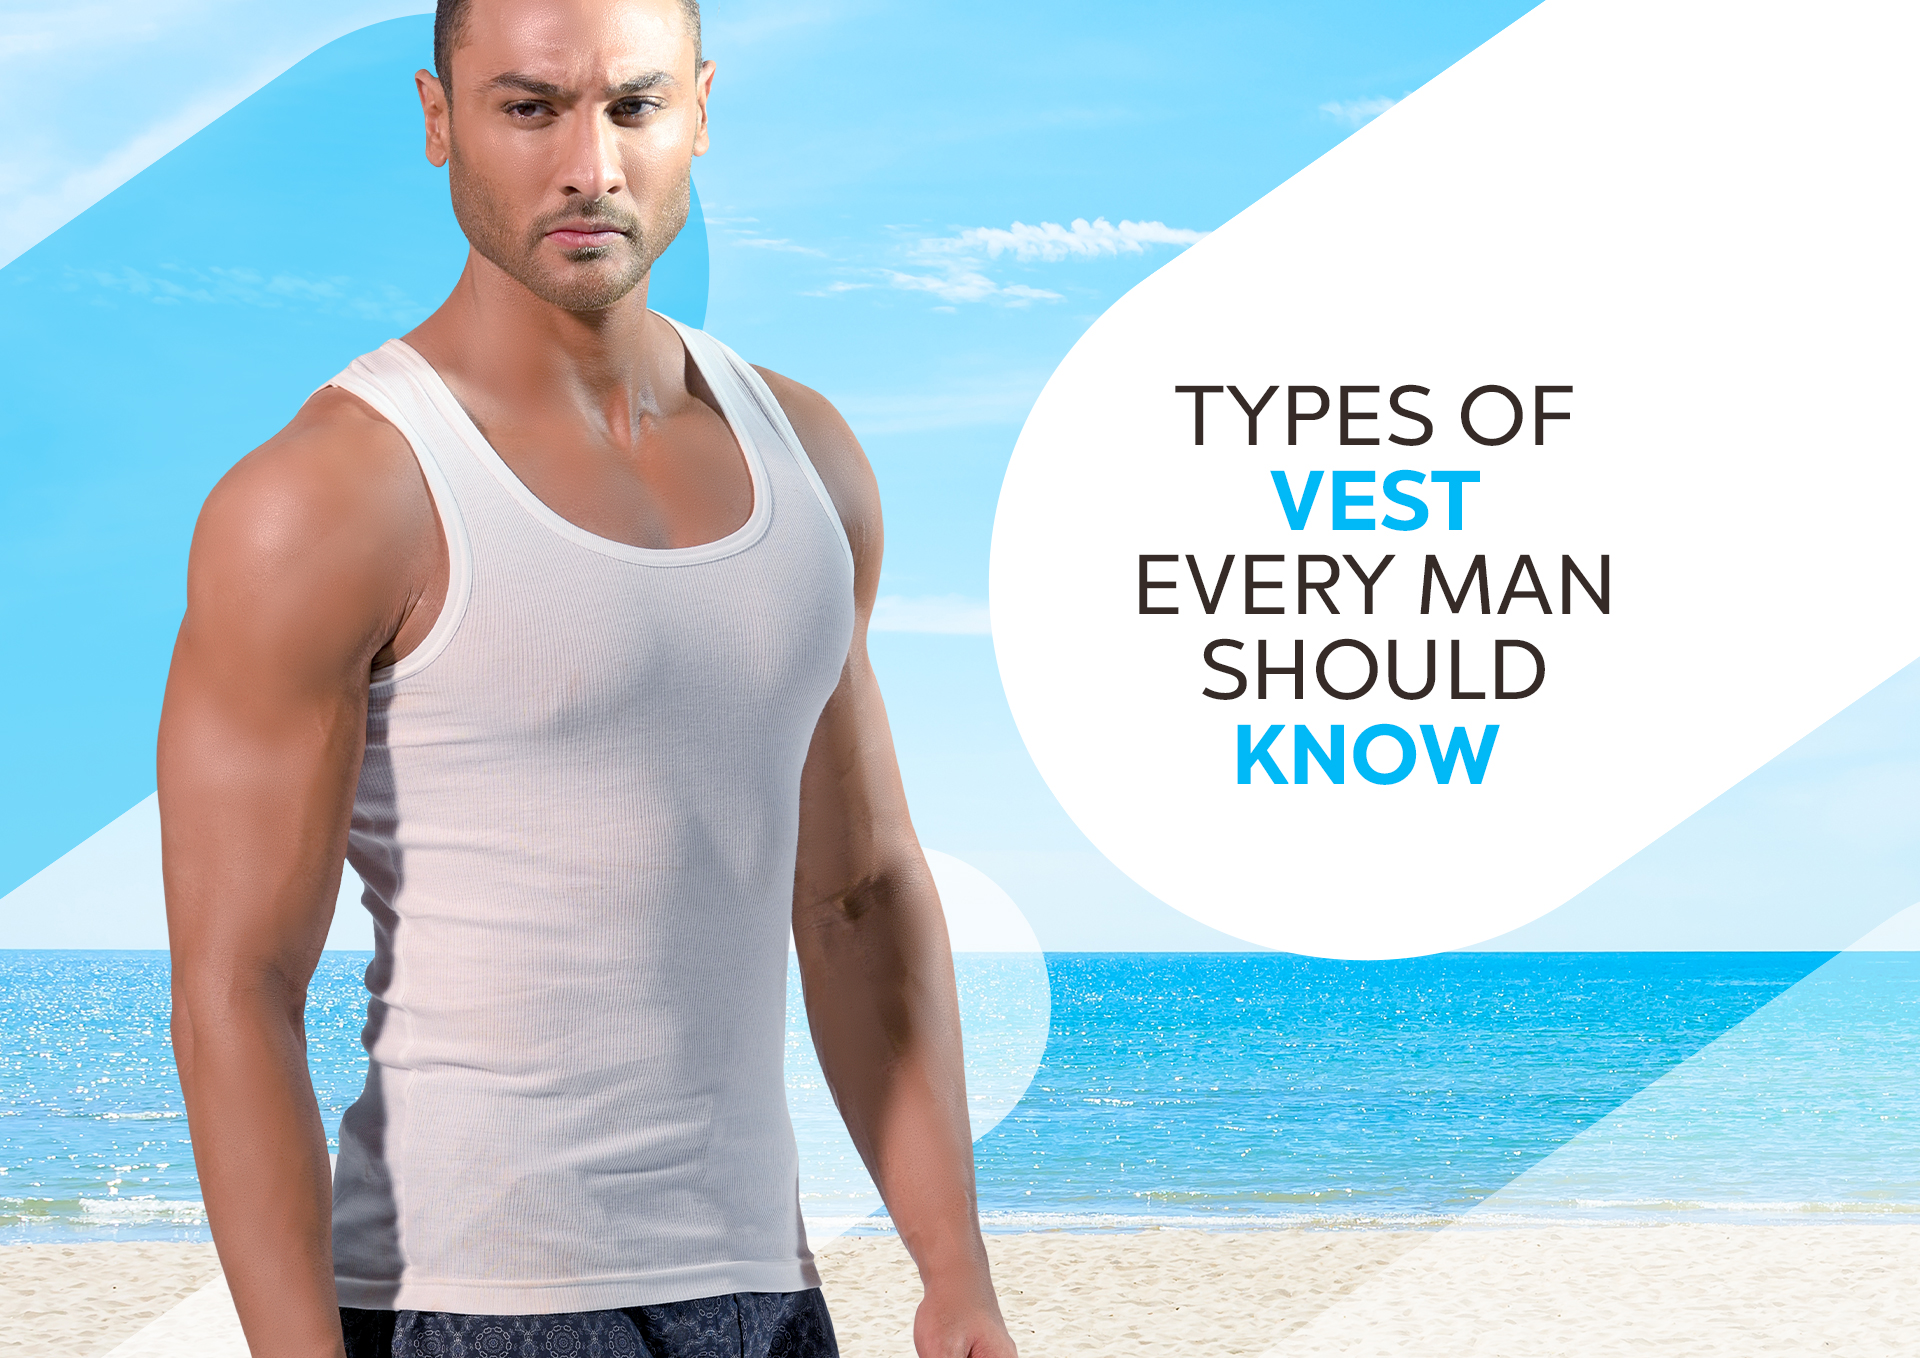 Types of Vest Every Man Should Know